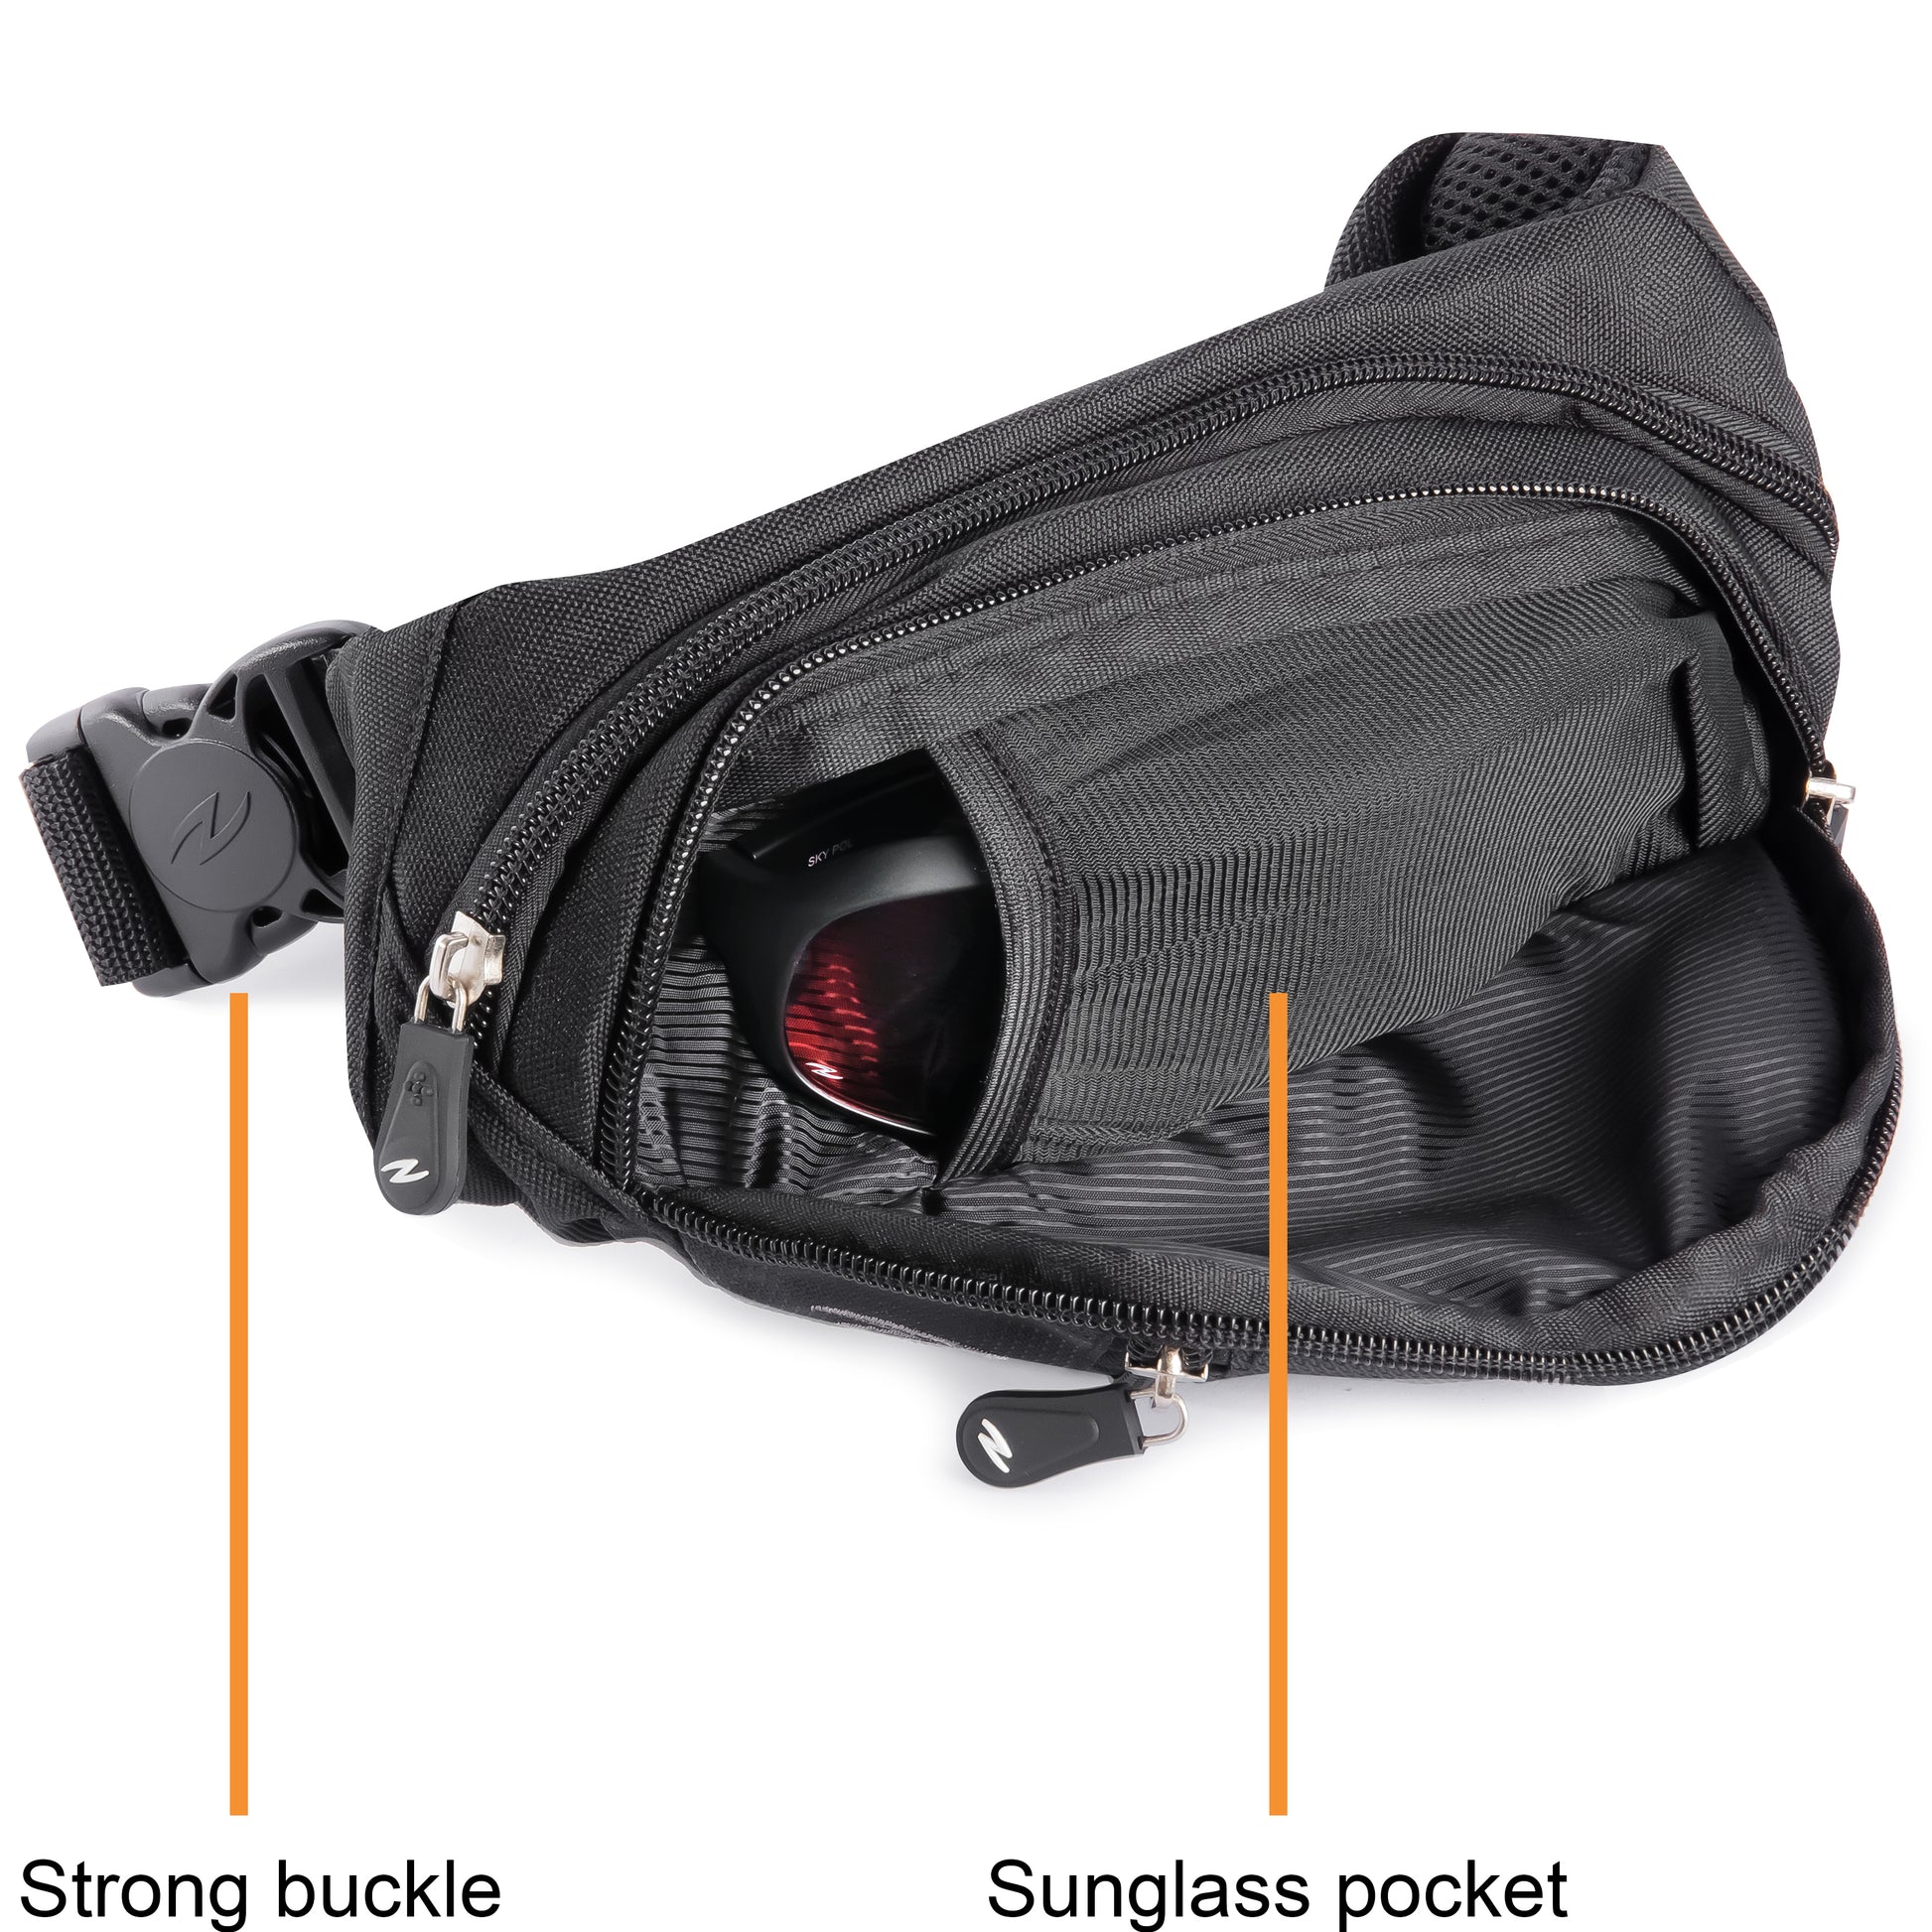 Zol Xsmall Fanny Pack With Bottle Opener - Zol Cycling